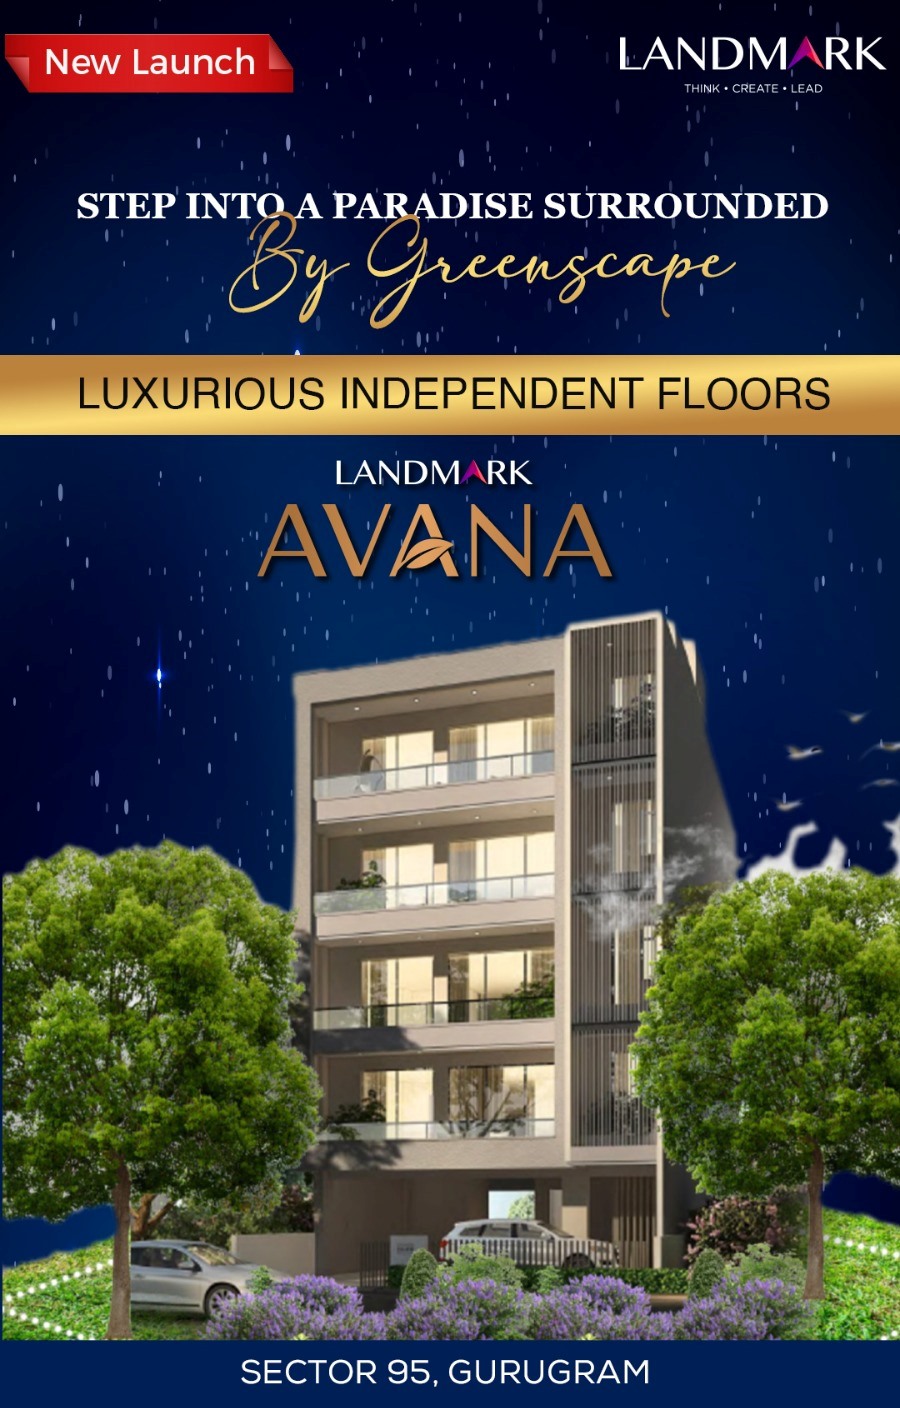 Step into a paradise surrounded by Green Scape at Landmark Avana in Sector 95, Gurgaon Update